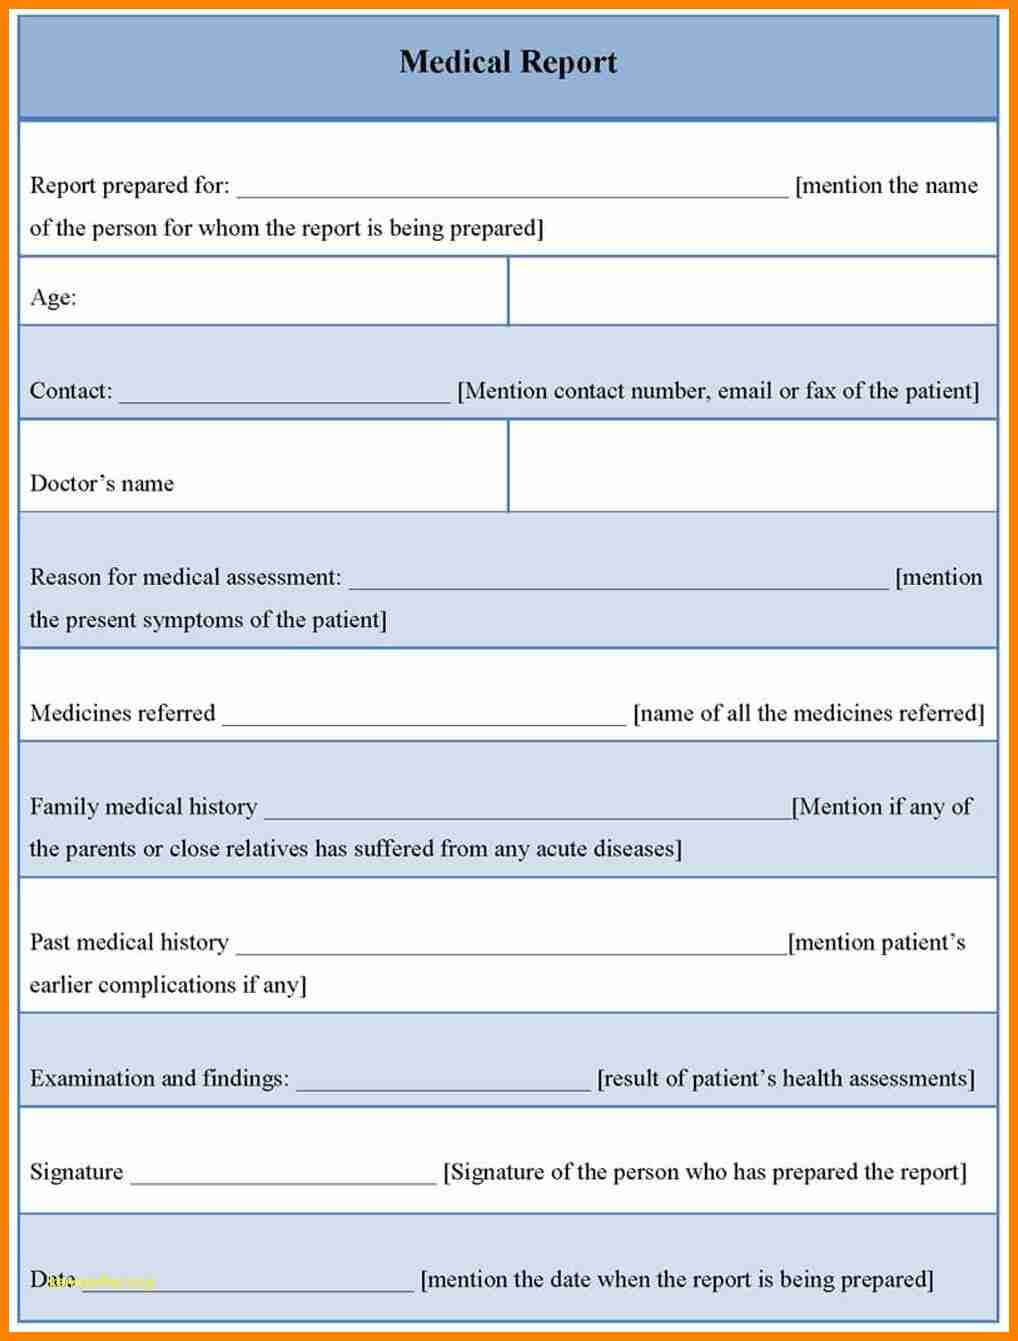 Doctor Report Template Medical Free Downloads Best Of Daily With Medical Report Template Free Downloads